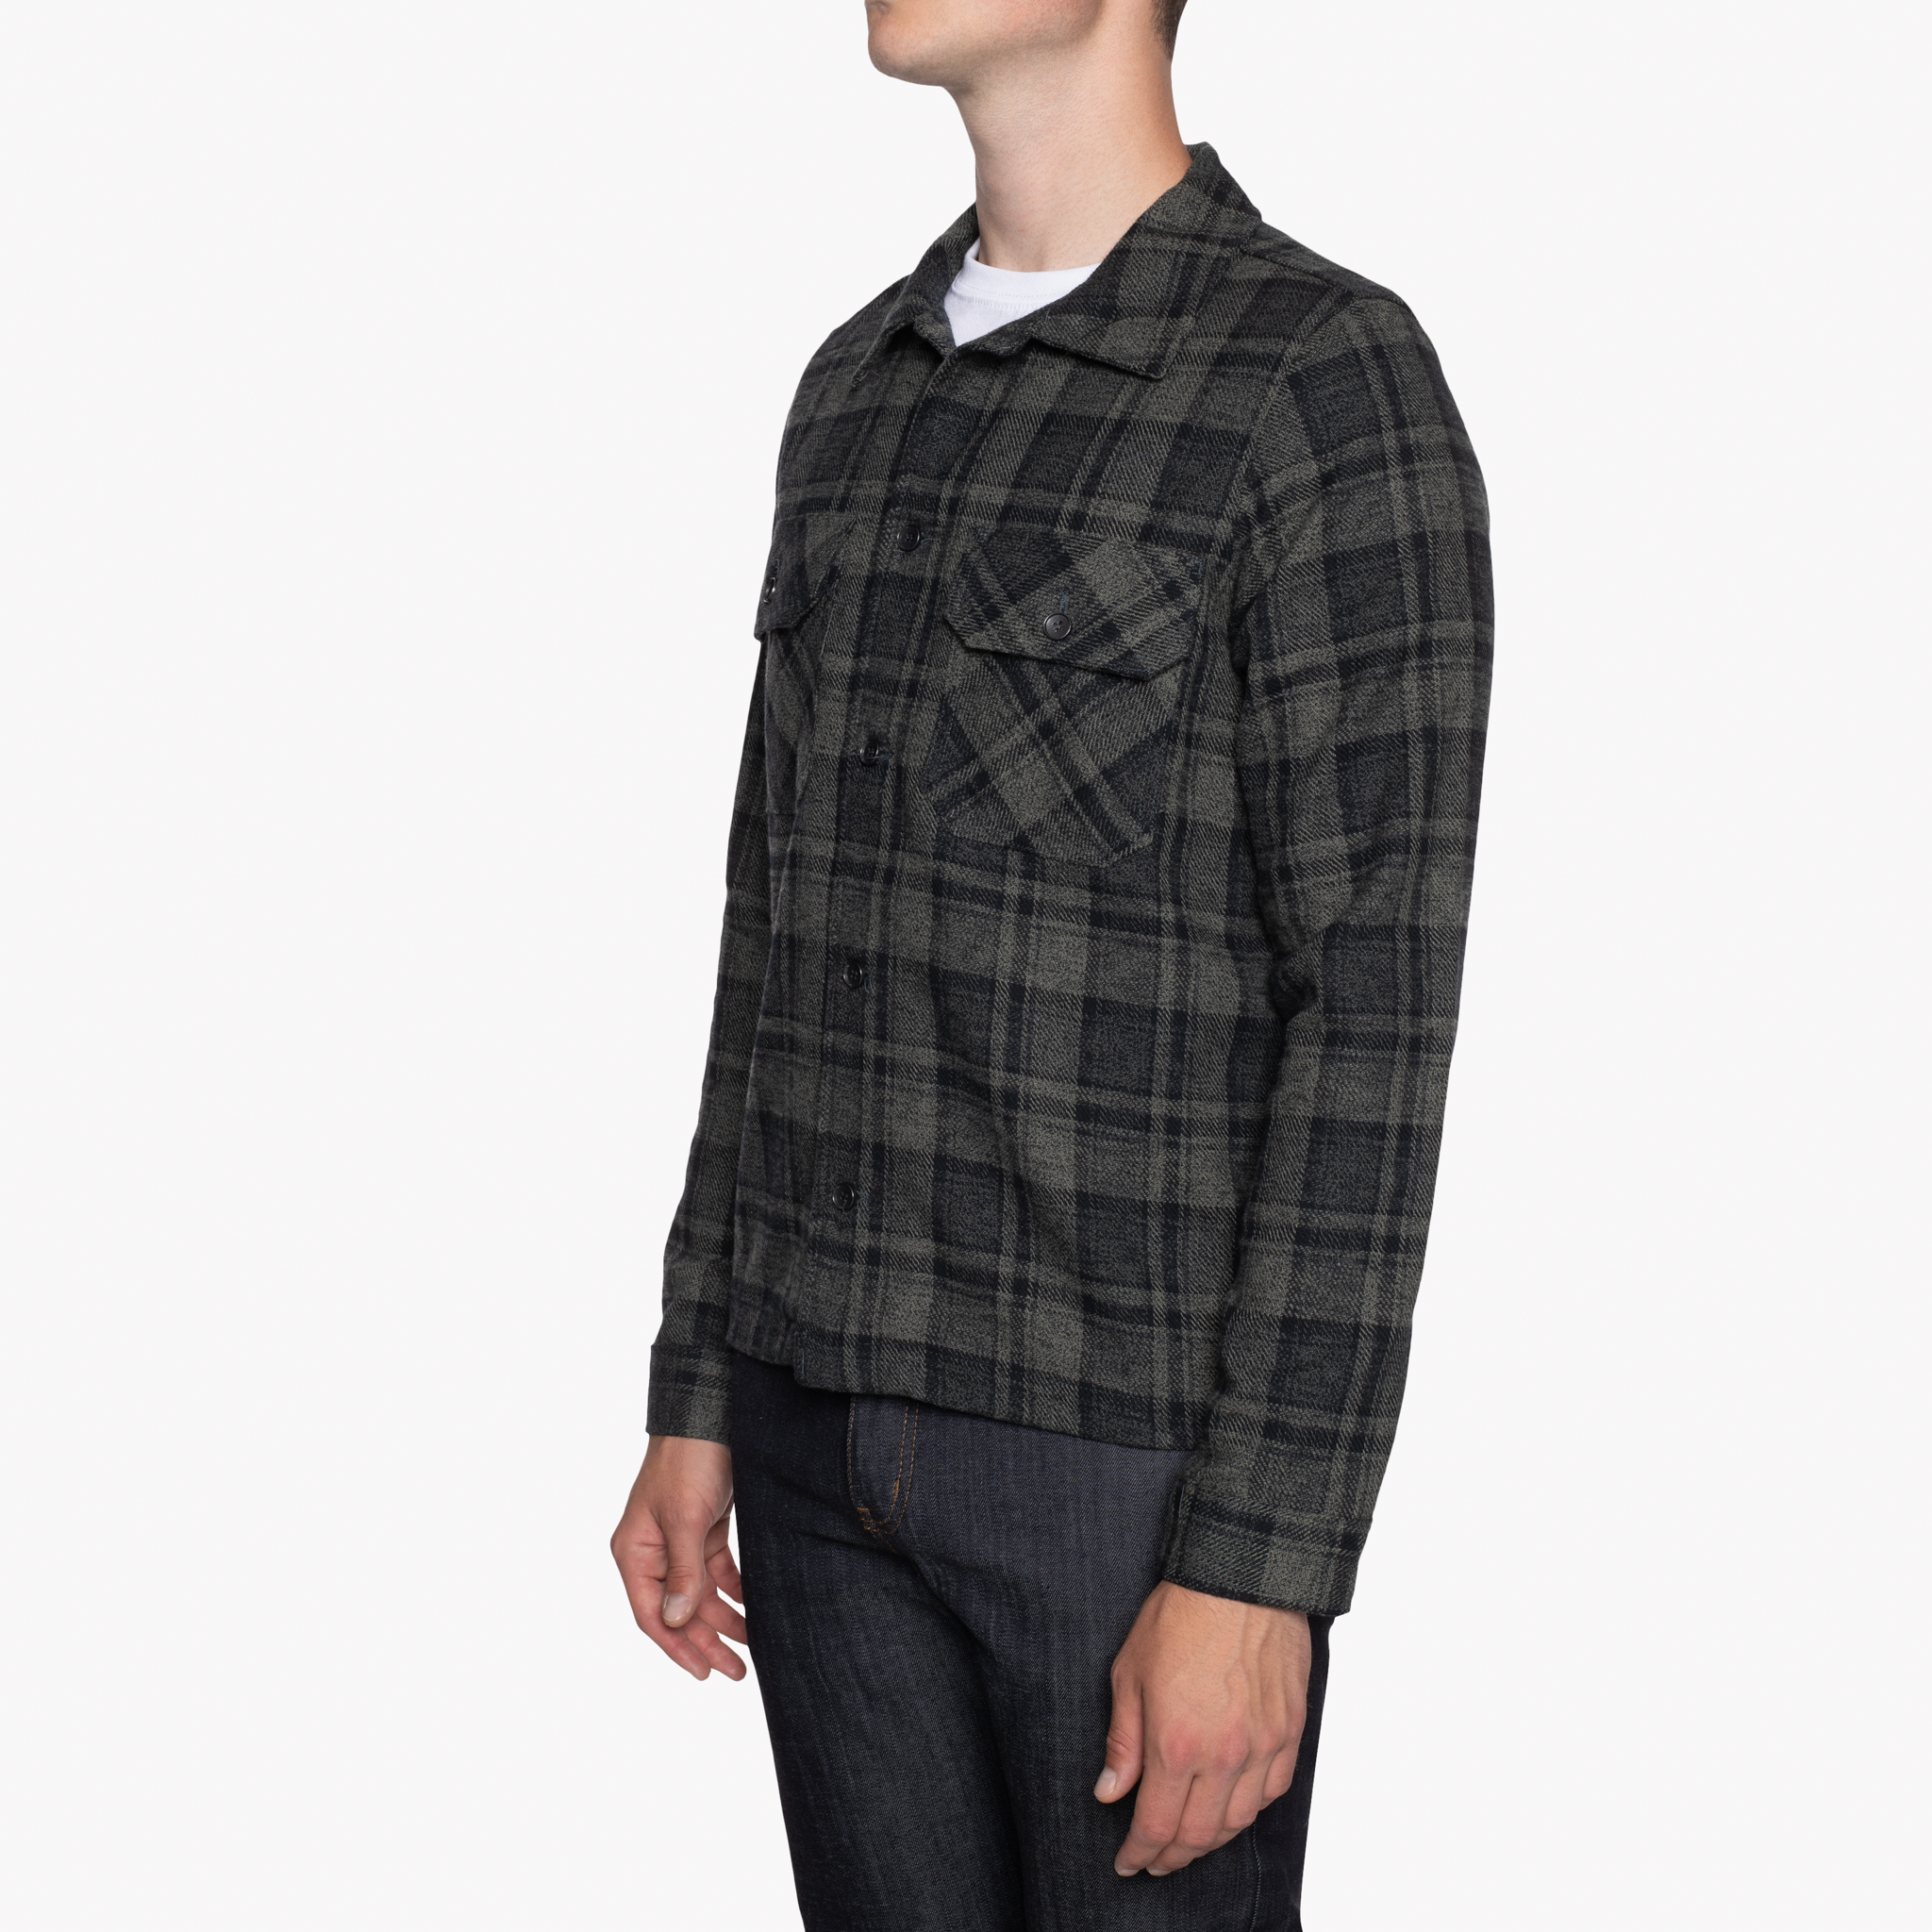  Work Shirt - Heavy Vintage Flannel - Charcoal - side 